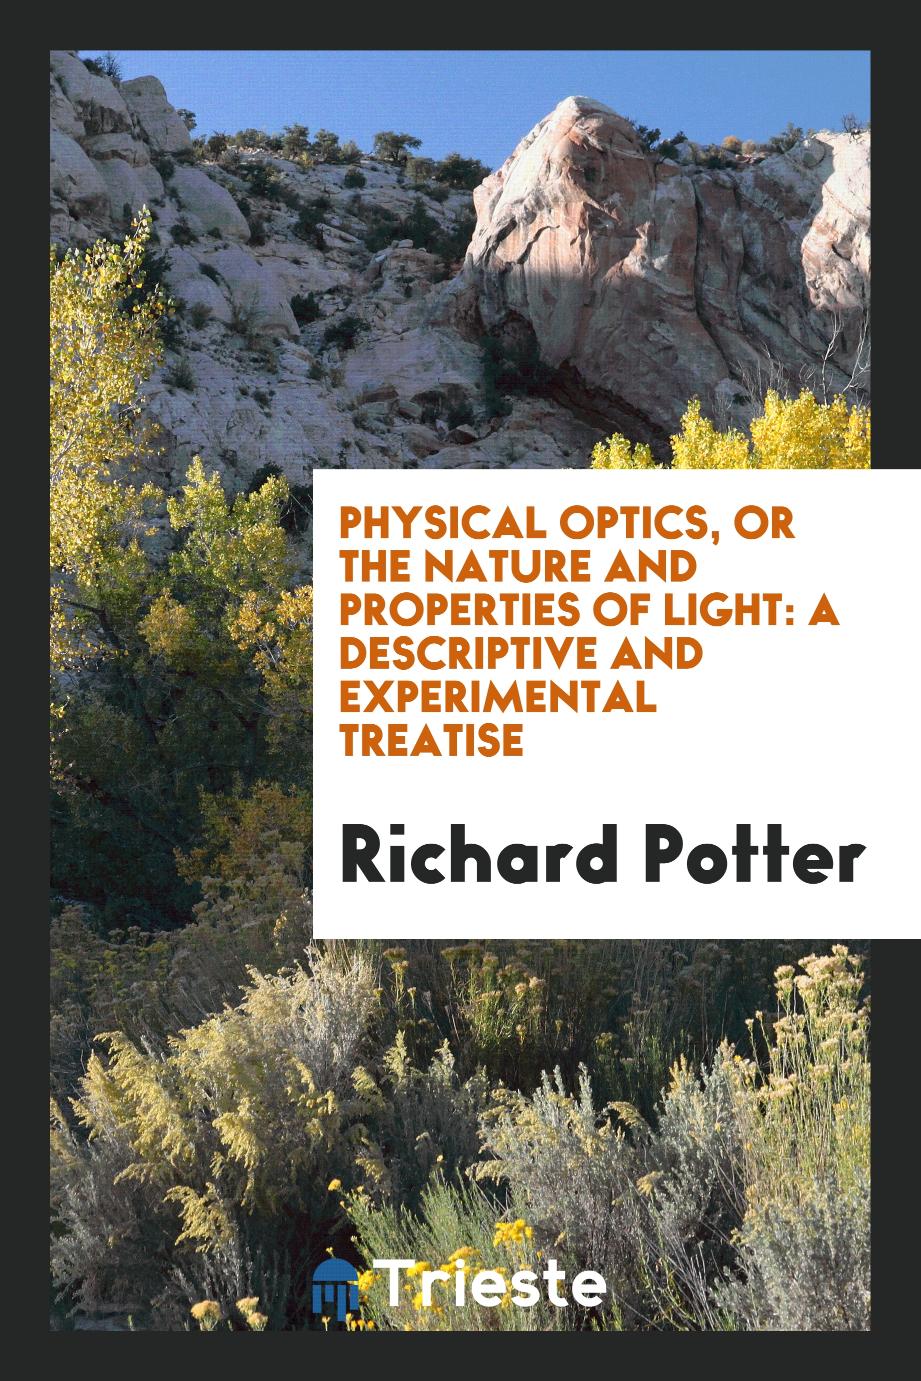 Physical Optics, or the Nature and Properties of Light: A Descriptive and Experimental Treatise